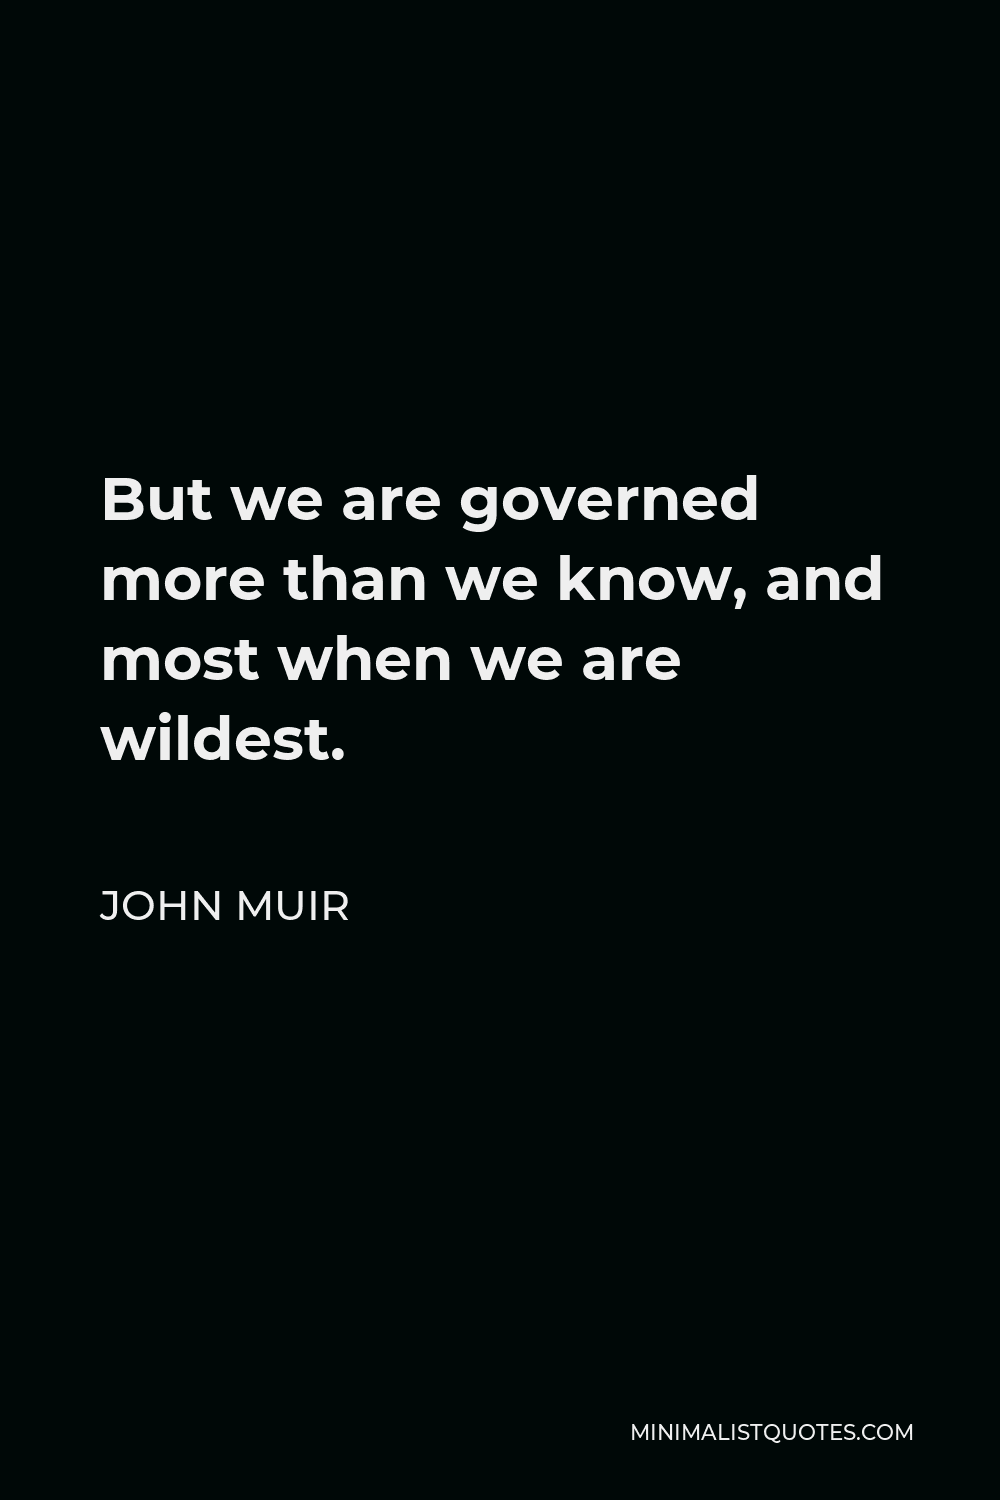 John Muir Quote - But we are governed more than we know, and most when we are wildest.